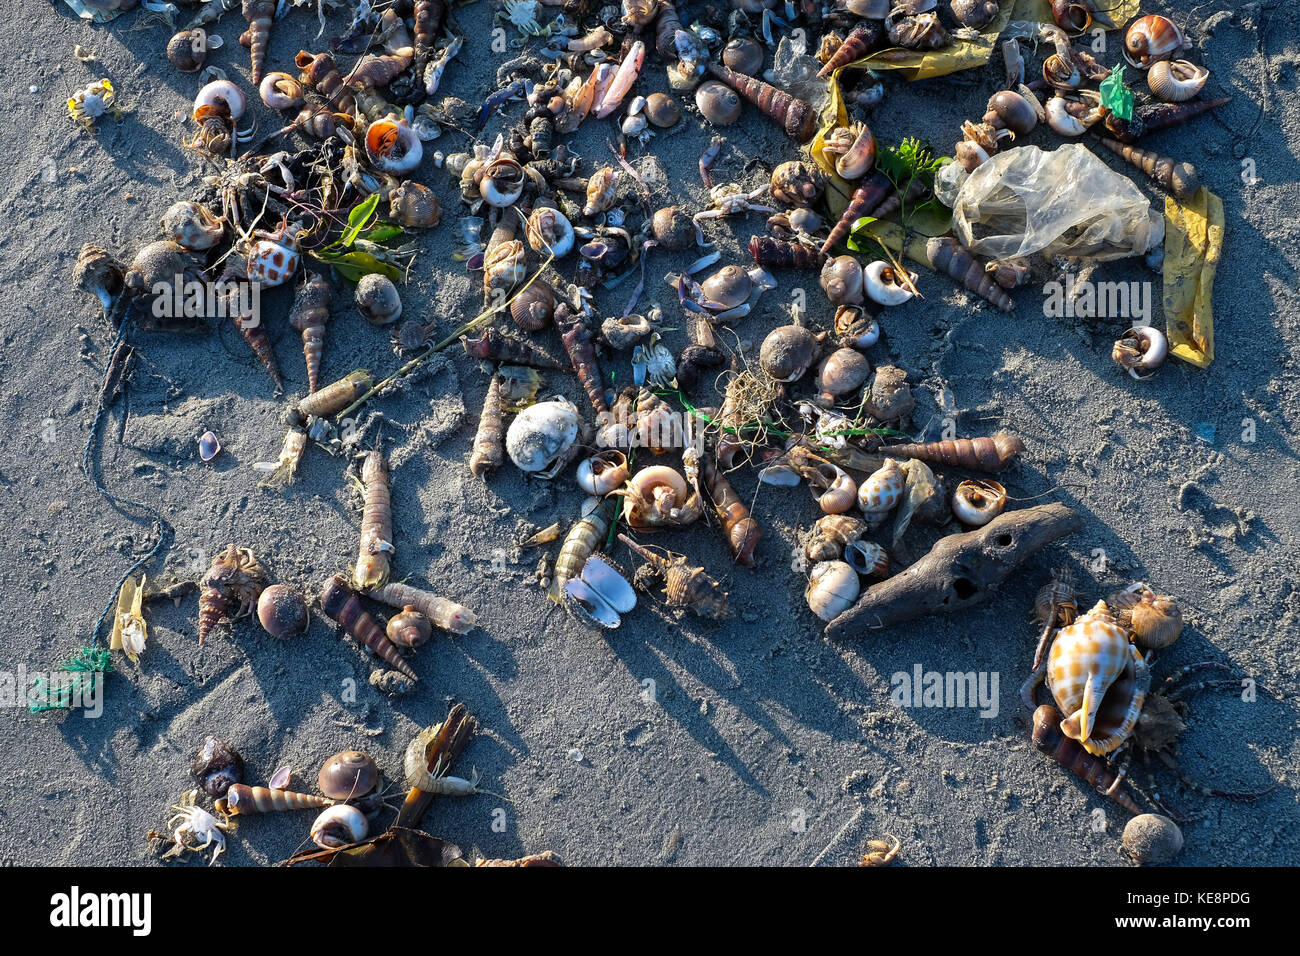 Snails, mussel drifted on the beach in sunny day Stock Photo